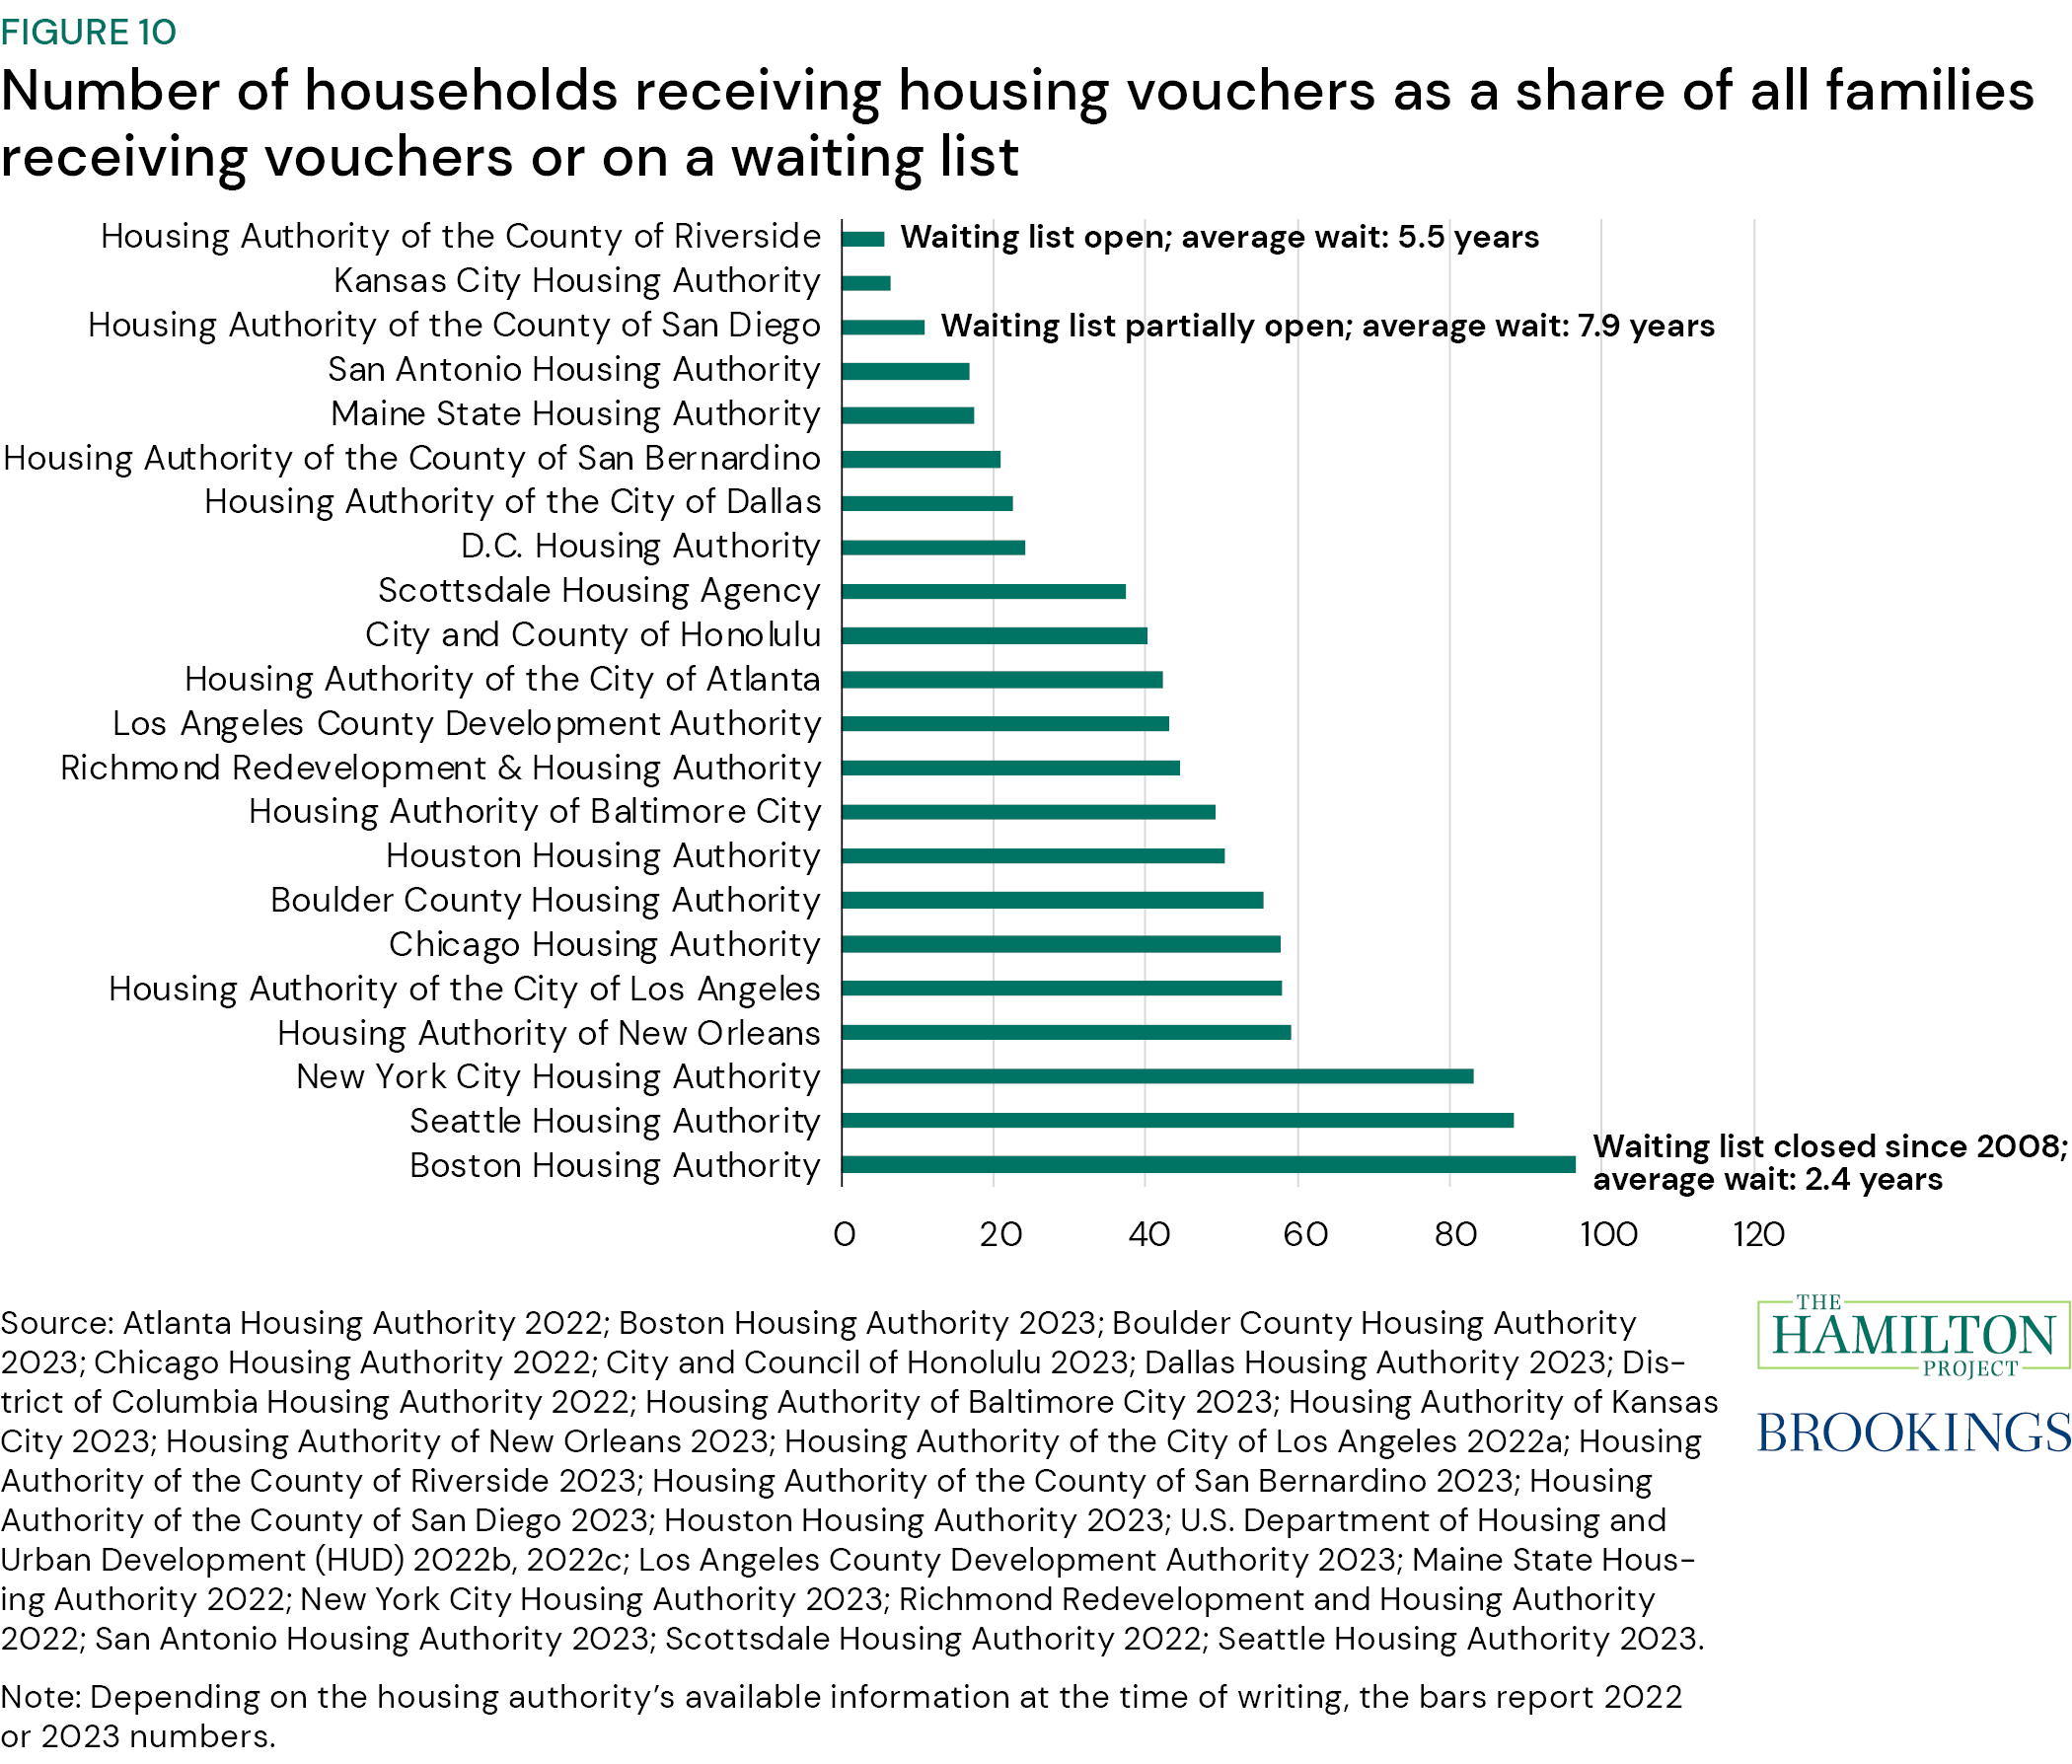 Figure 10: Number of households receiving housing vouchers as a share of all families receiving vouchers or on a waiting list. Figure 10 plots the ratio of households that have an approved housing voucher application to all those who have applied for a voucher (including both those who have received a voucher as well as those on a Section 8 waiting list) for select cities as a gauge for whether housing agencies can accommodate demand.